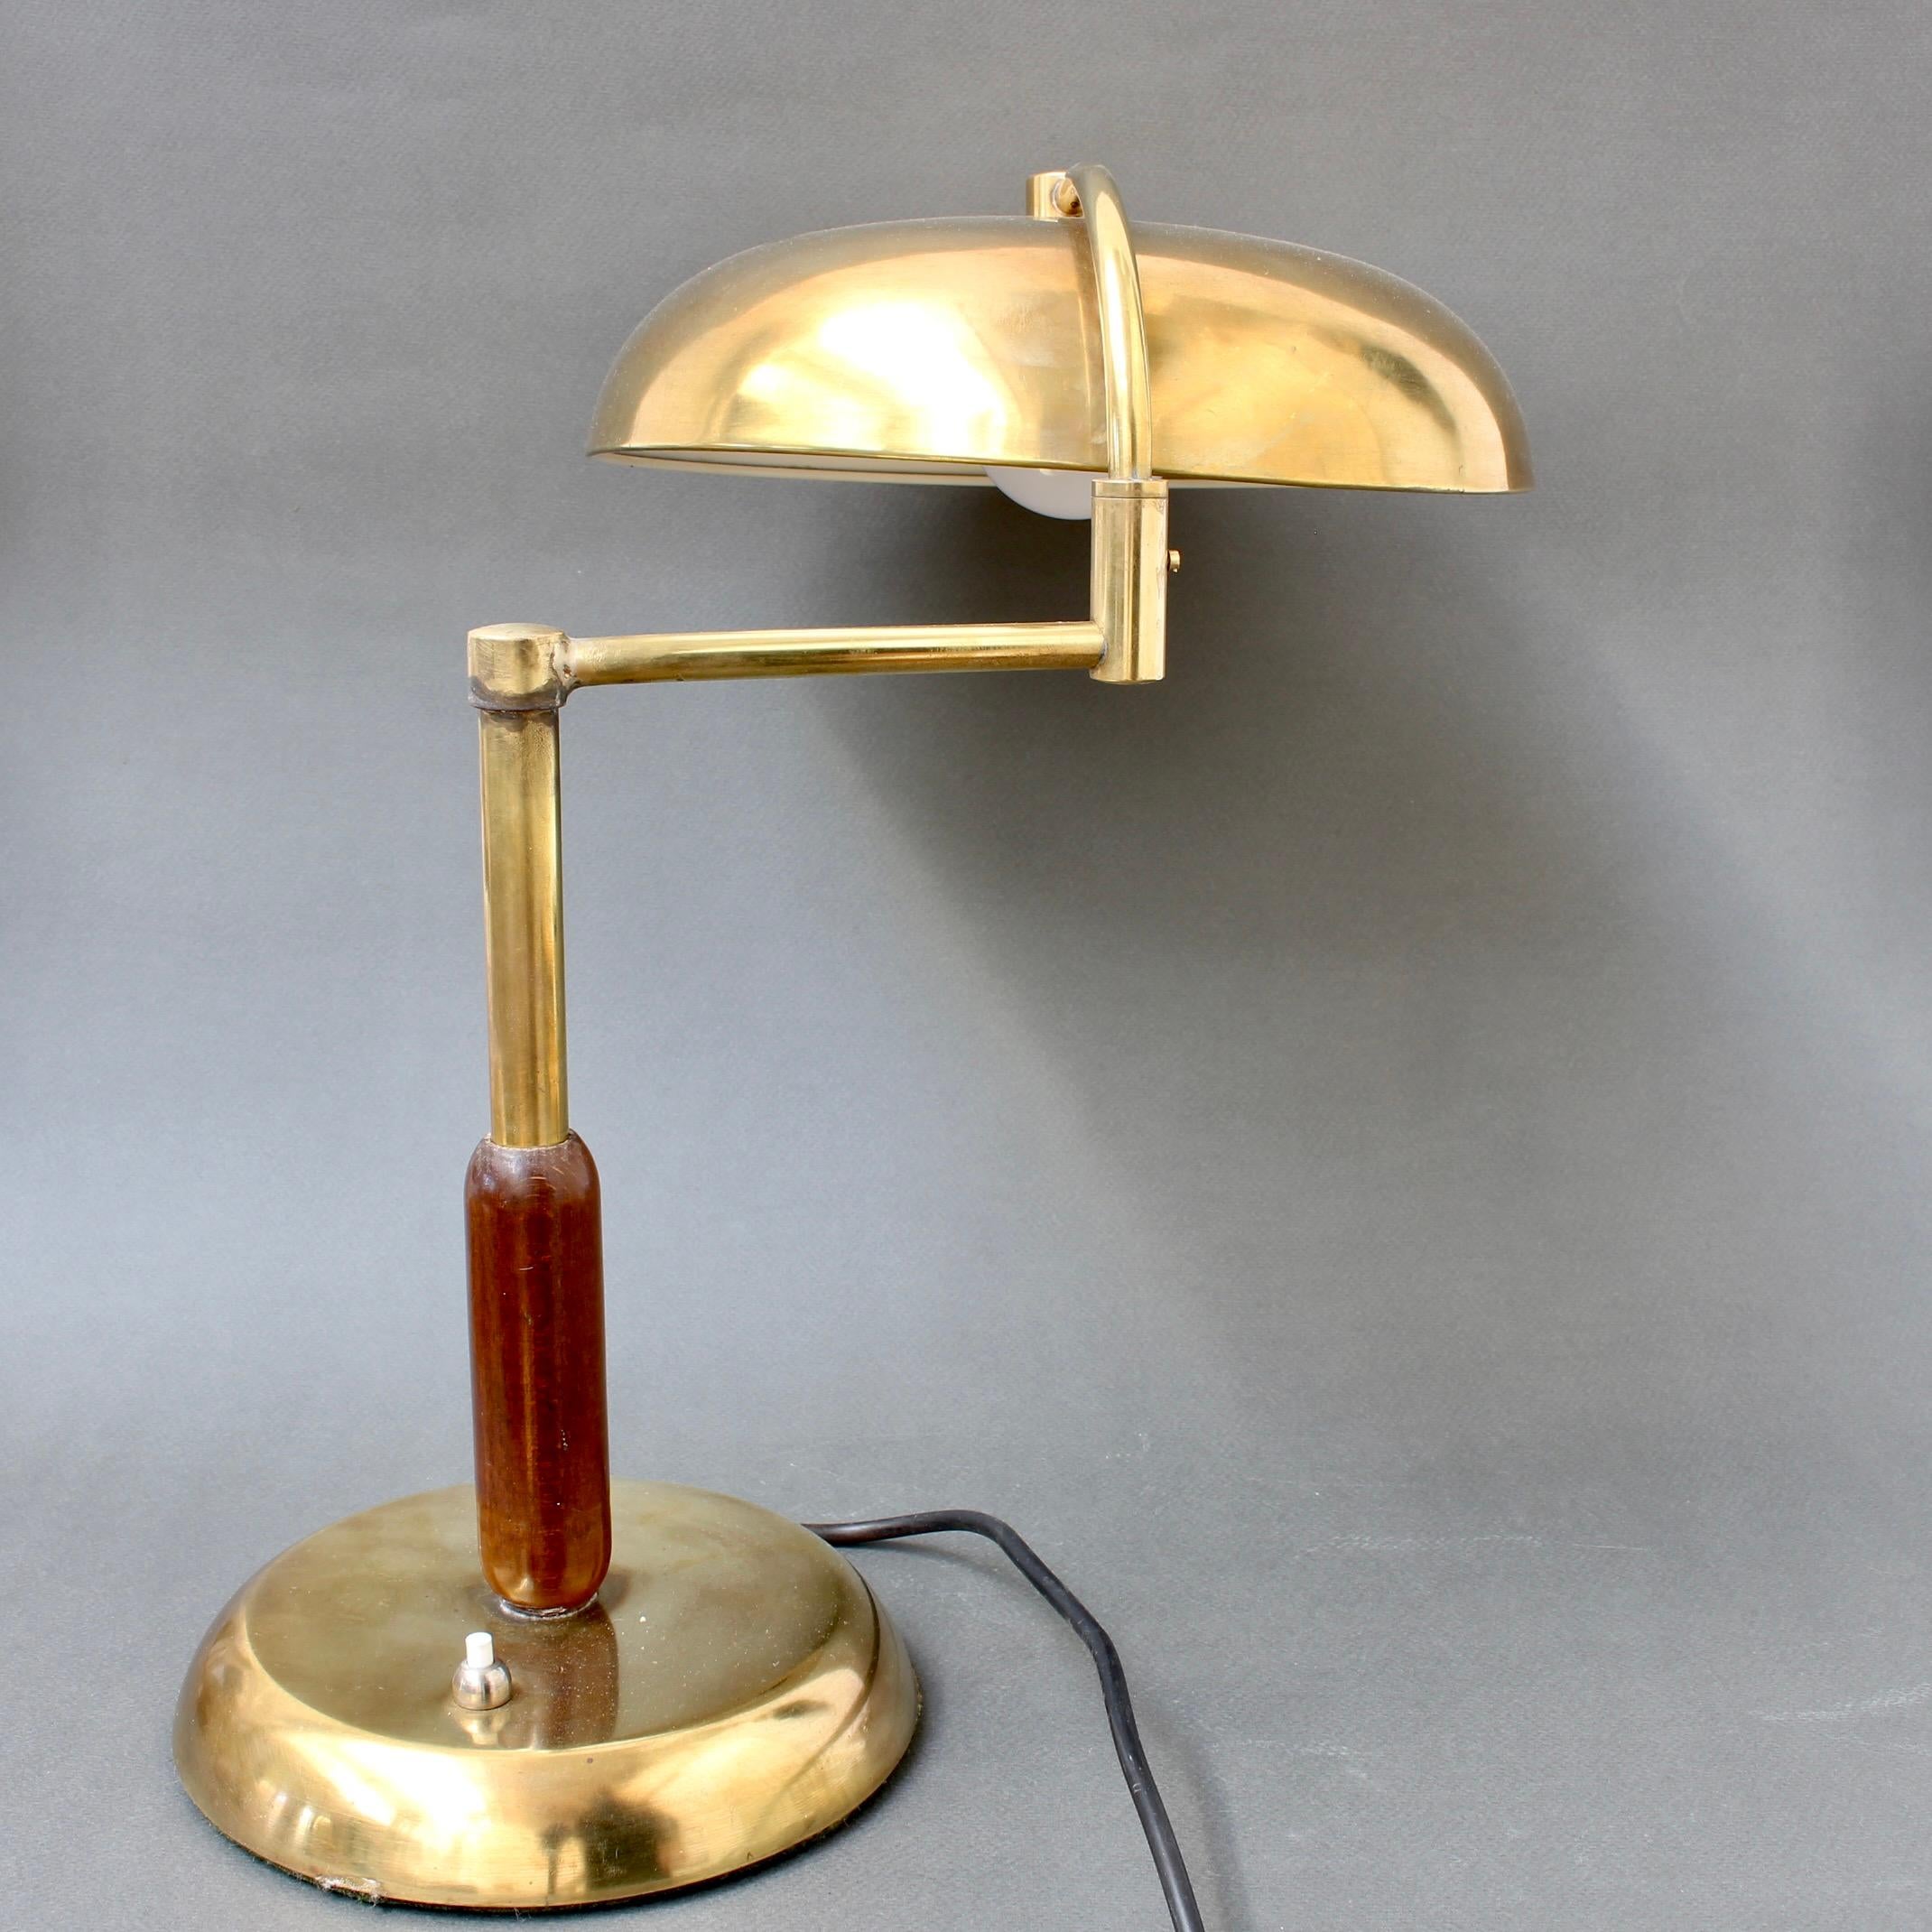 Italian Mid-Century Brass Table Lamp with Swivel Arm, circa 1950s In Good Condition For Sale In London, GB